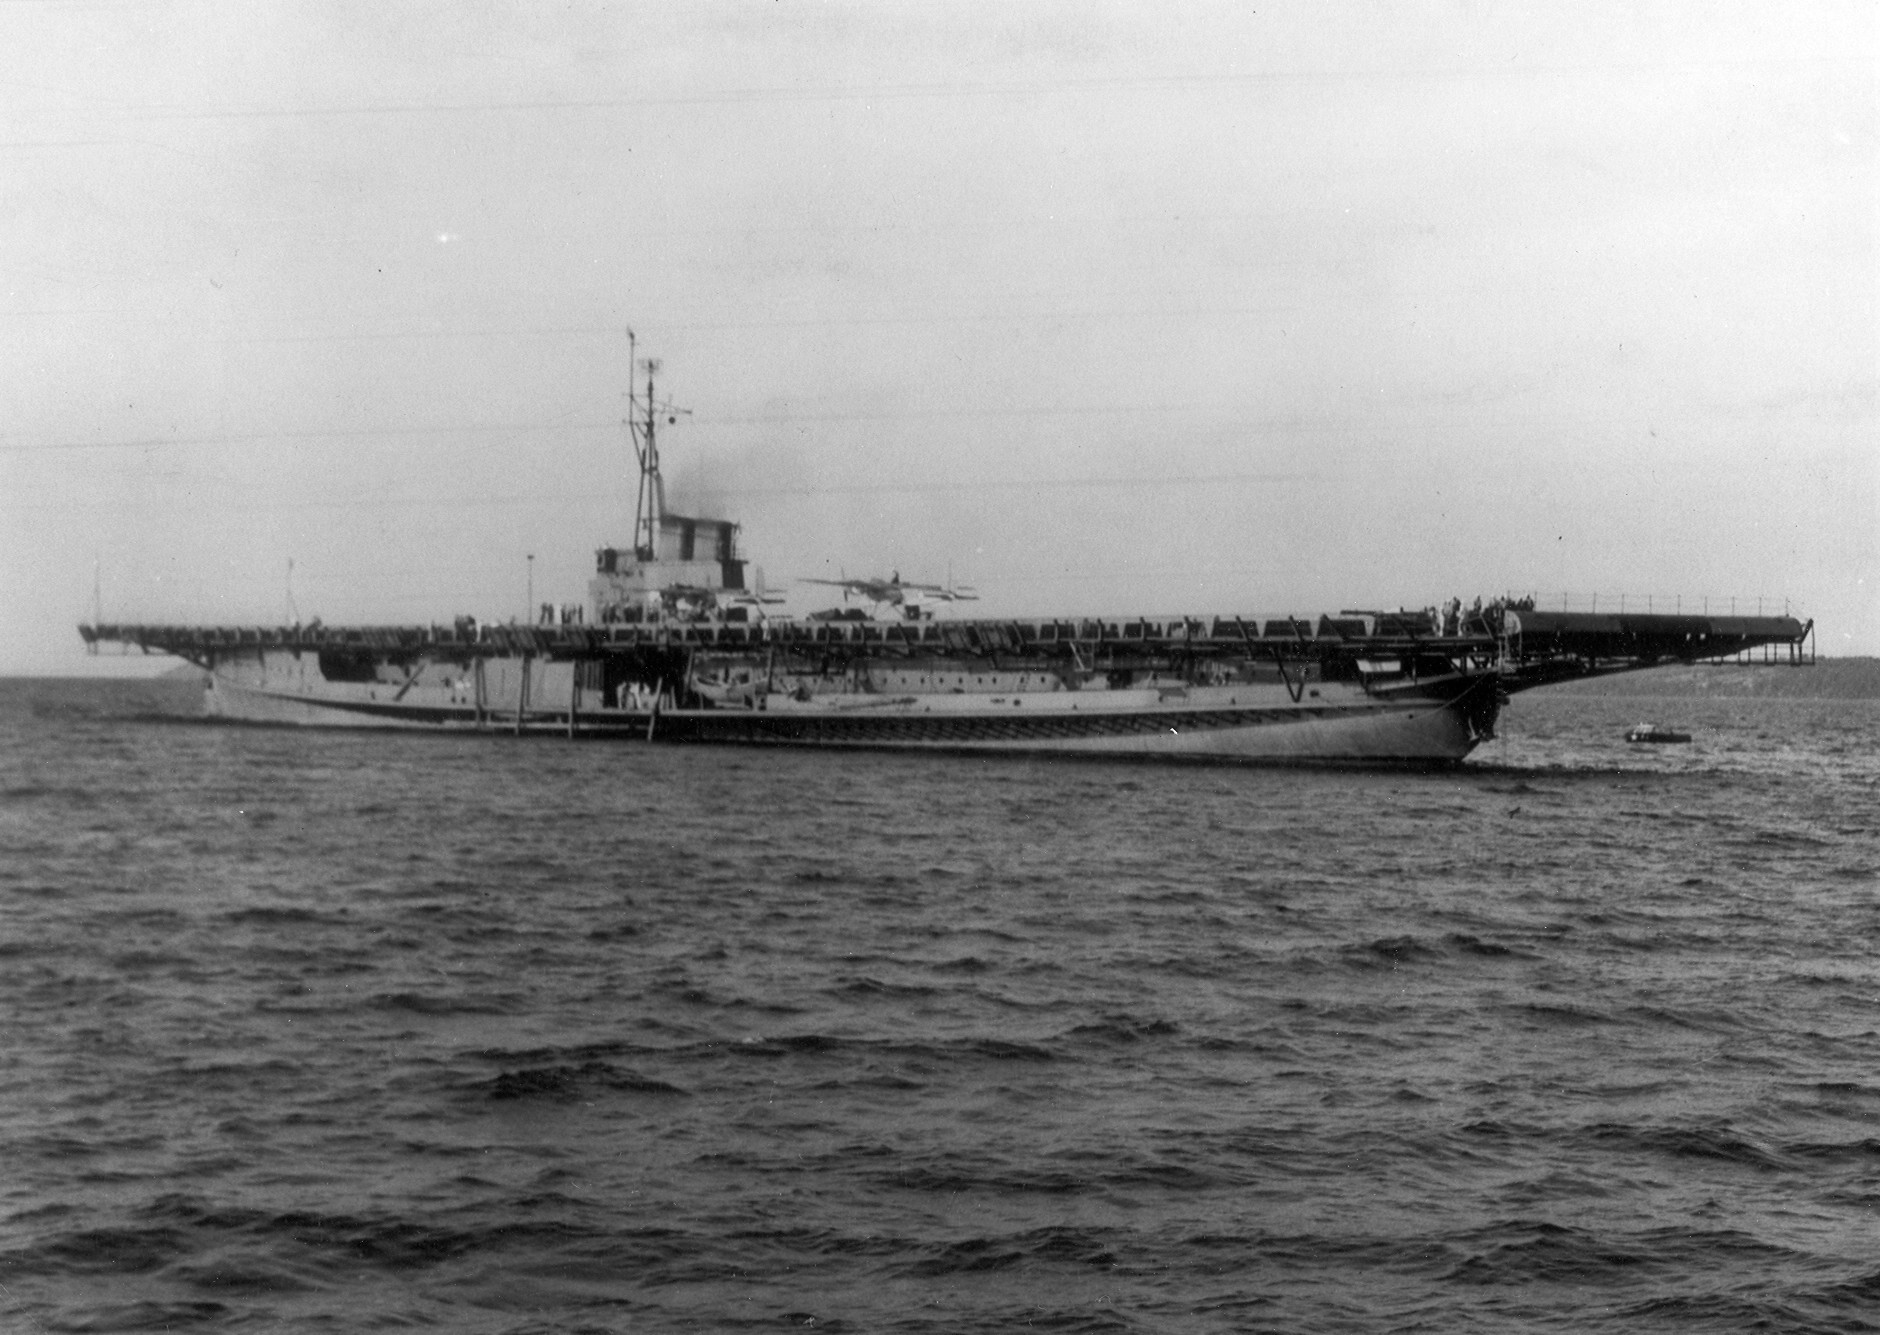 USS Sable at anchor in West Grand Traverse Bay, off Traverse City, Michigan, United States, 10 Aug 1943; note two TDN-1 assault drone on the flight deck